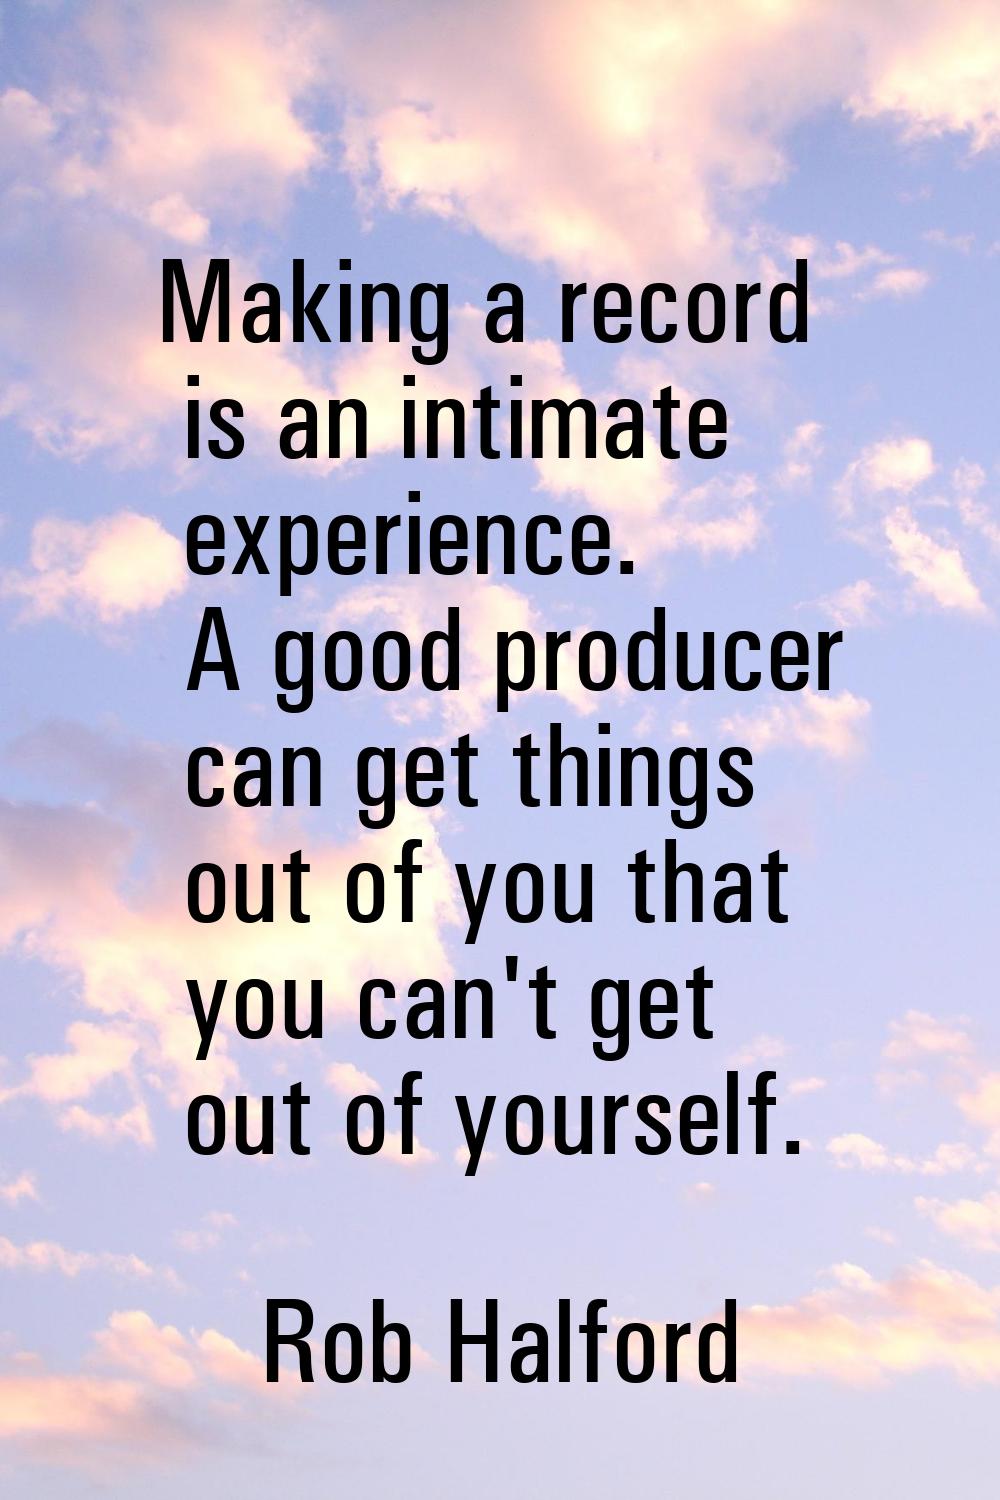 Making a record is an intimate experience. A good producer can get things out of you that you can't